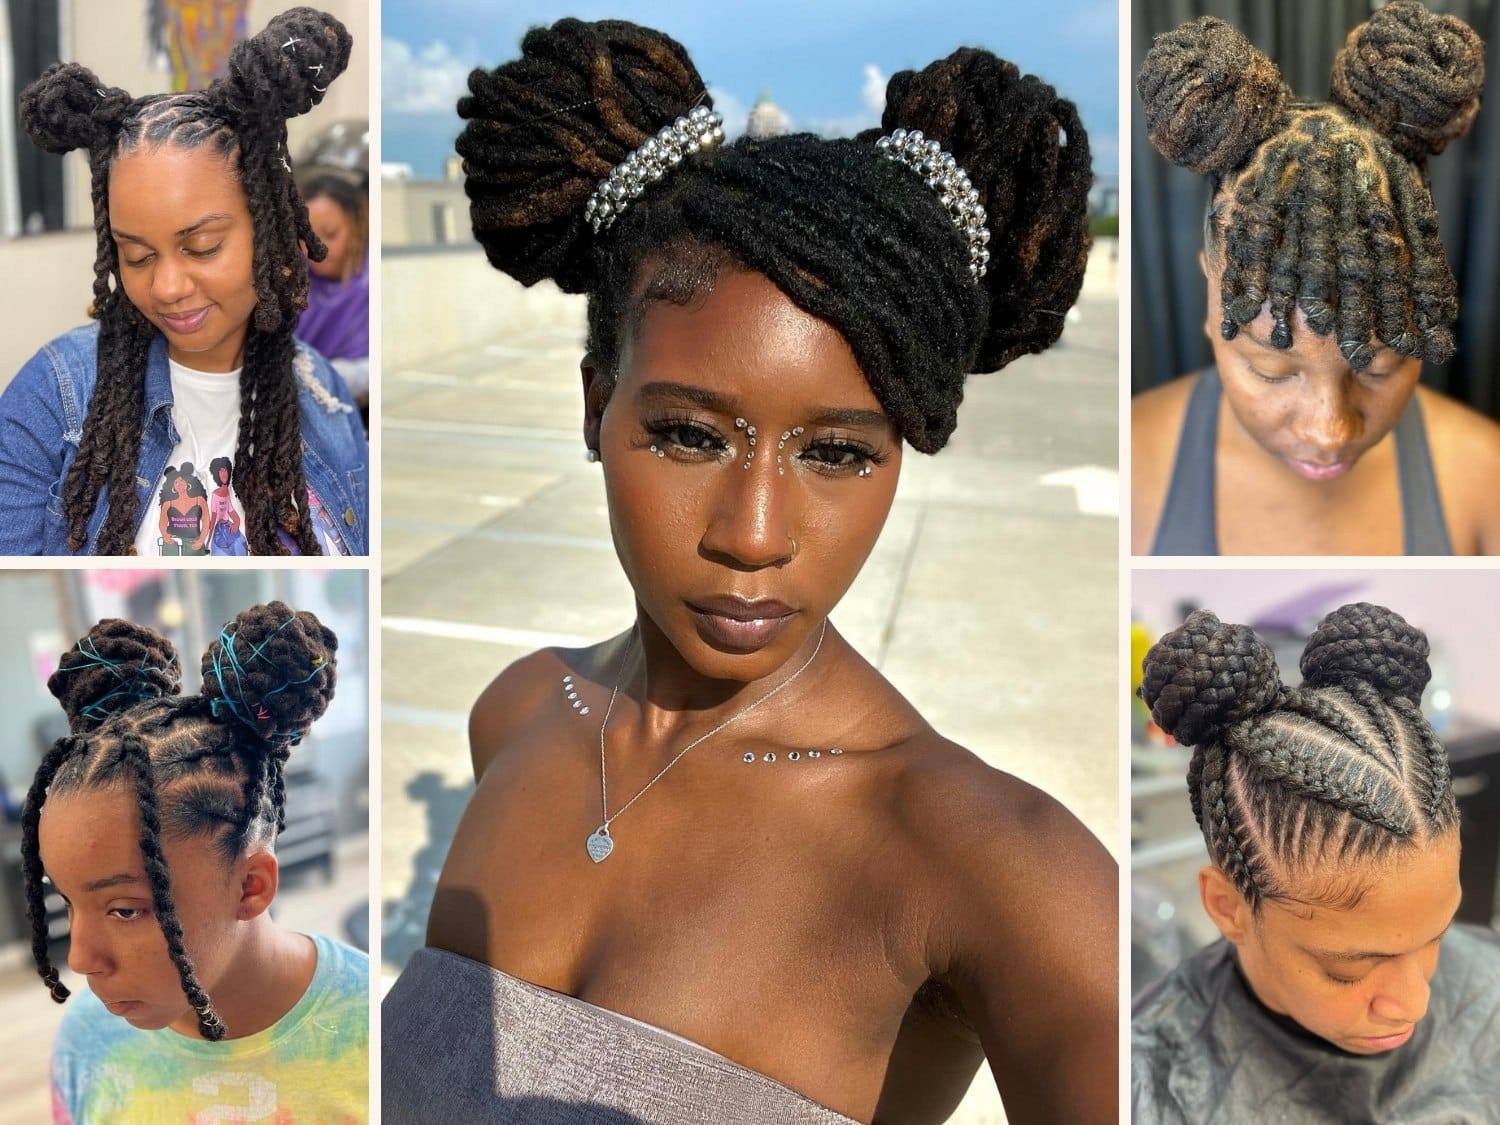 Hairstyles of Space Buns with Braids